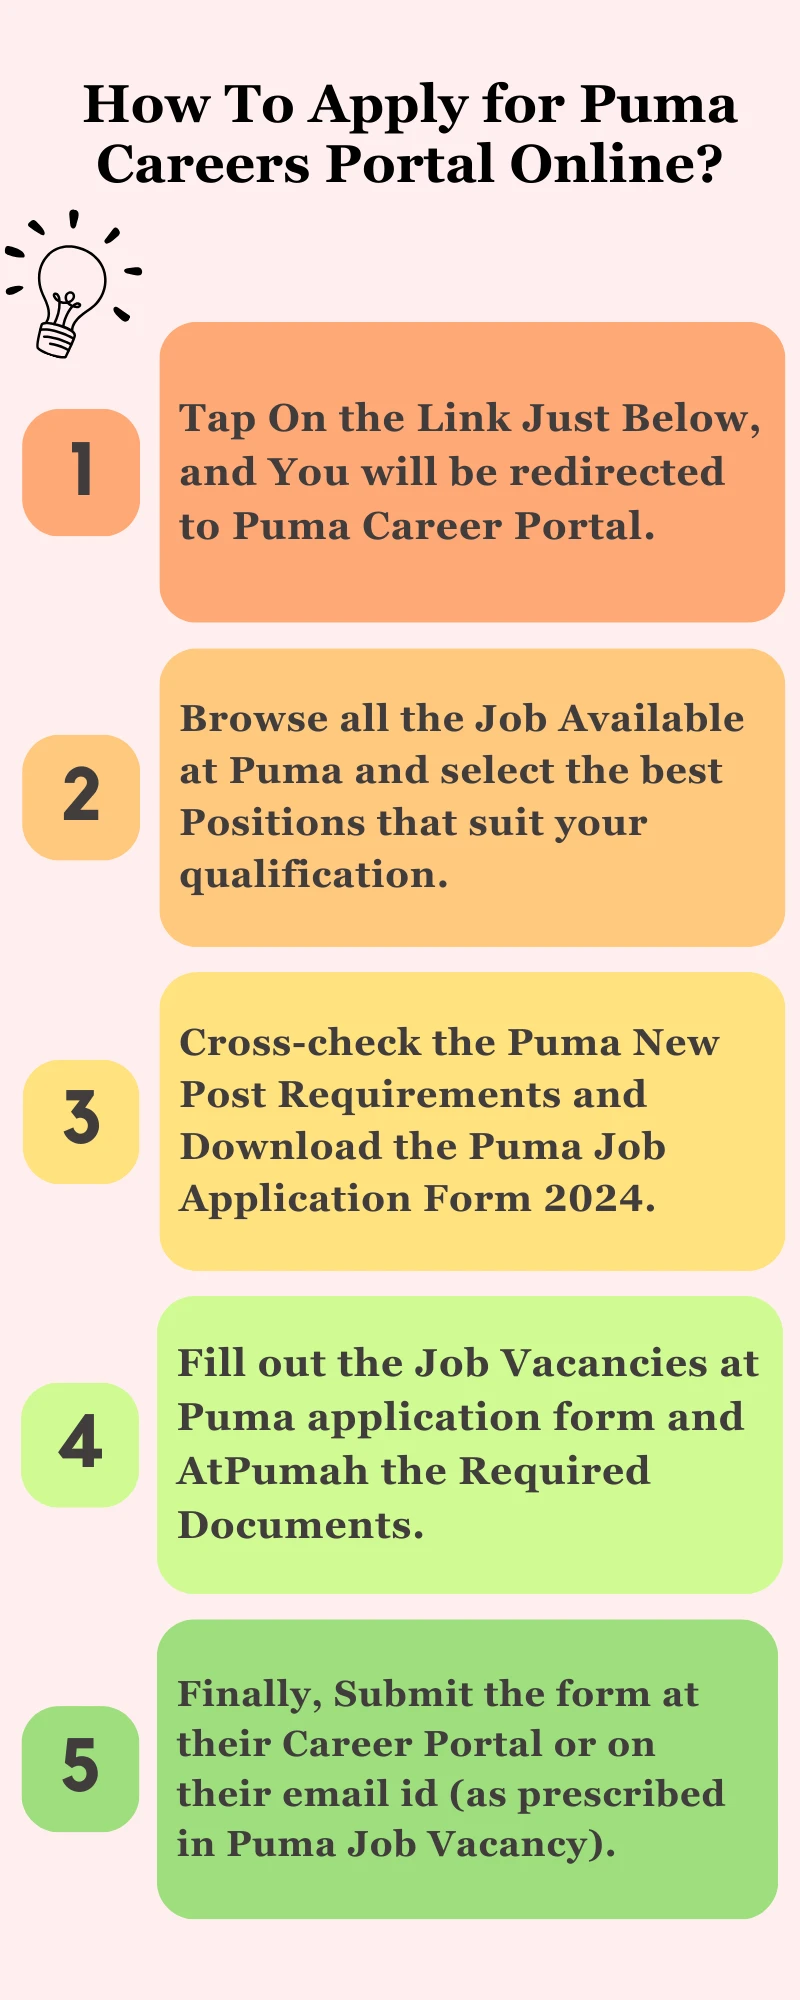 How To Apply for Puma Careers Portal Online?